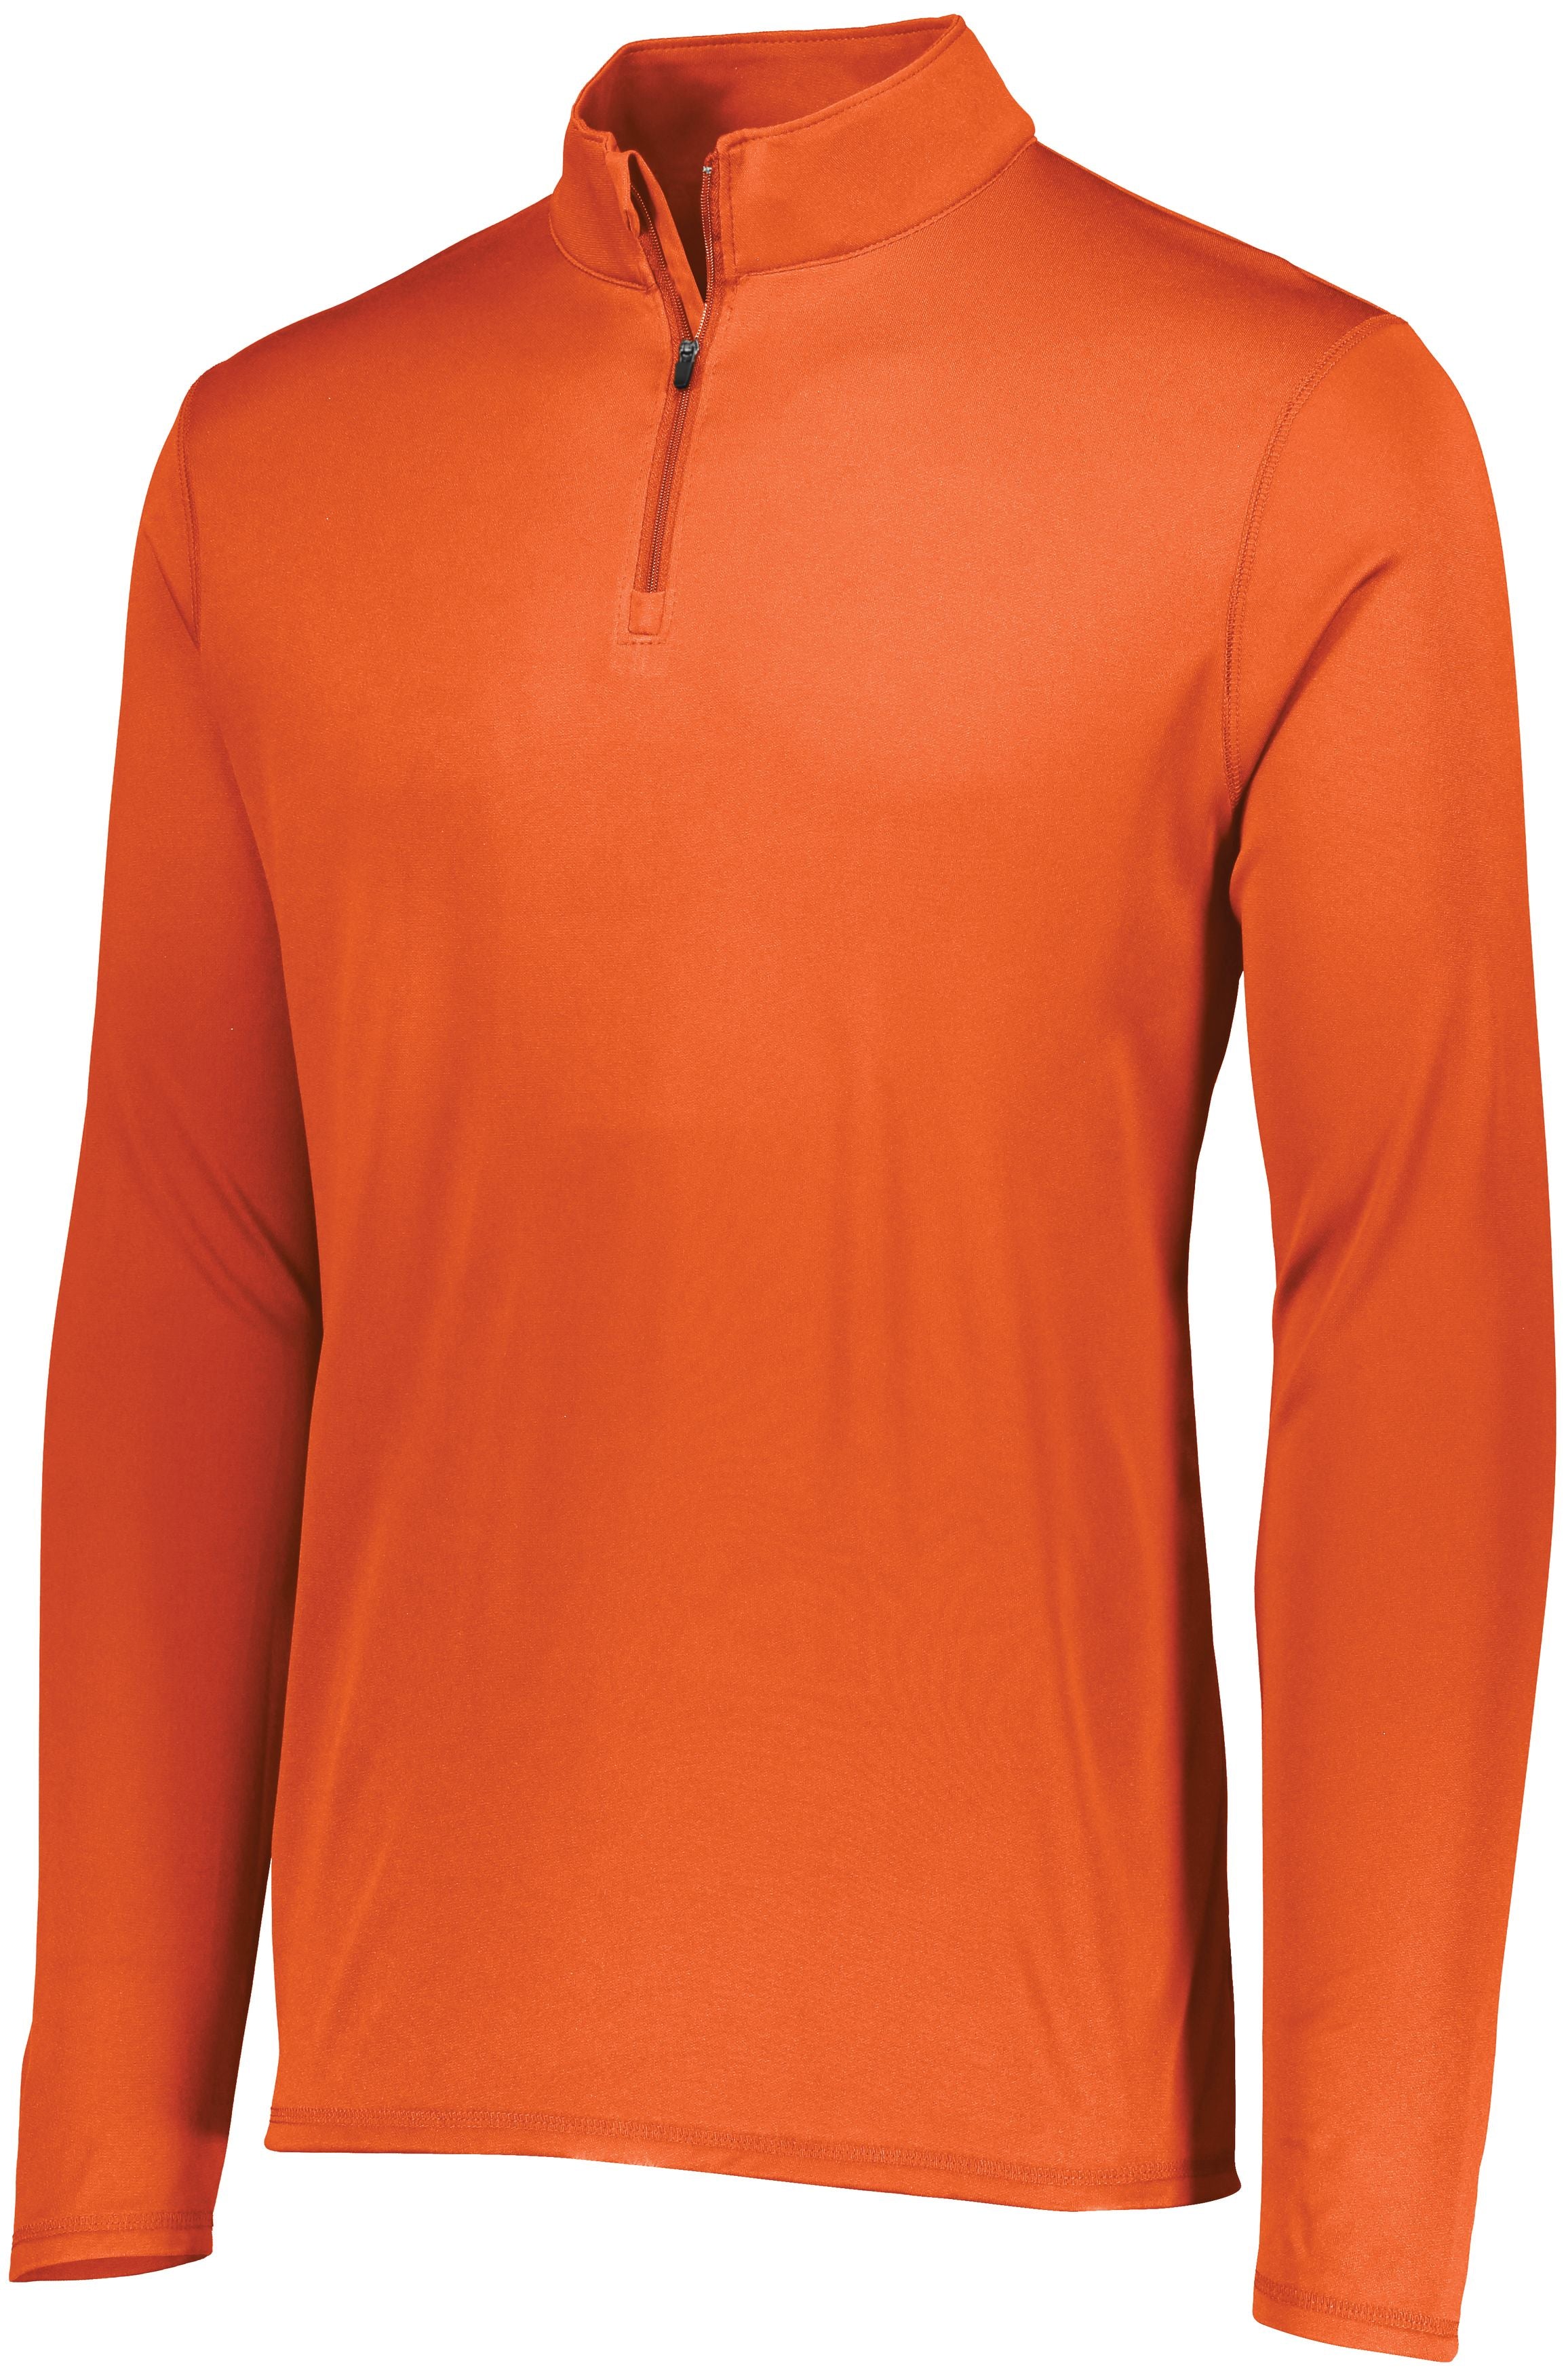 Augusta Sportswear Attain Wicking 1/4 Zip Pullover in Orange  -Part of the Adult, Adult-Pullover, Augusta-Products, Outerwear product lines at KanaleyCreations.com